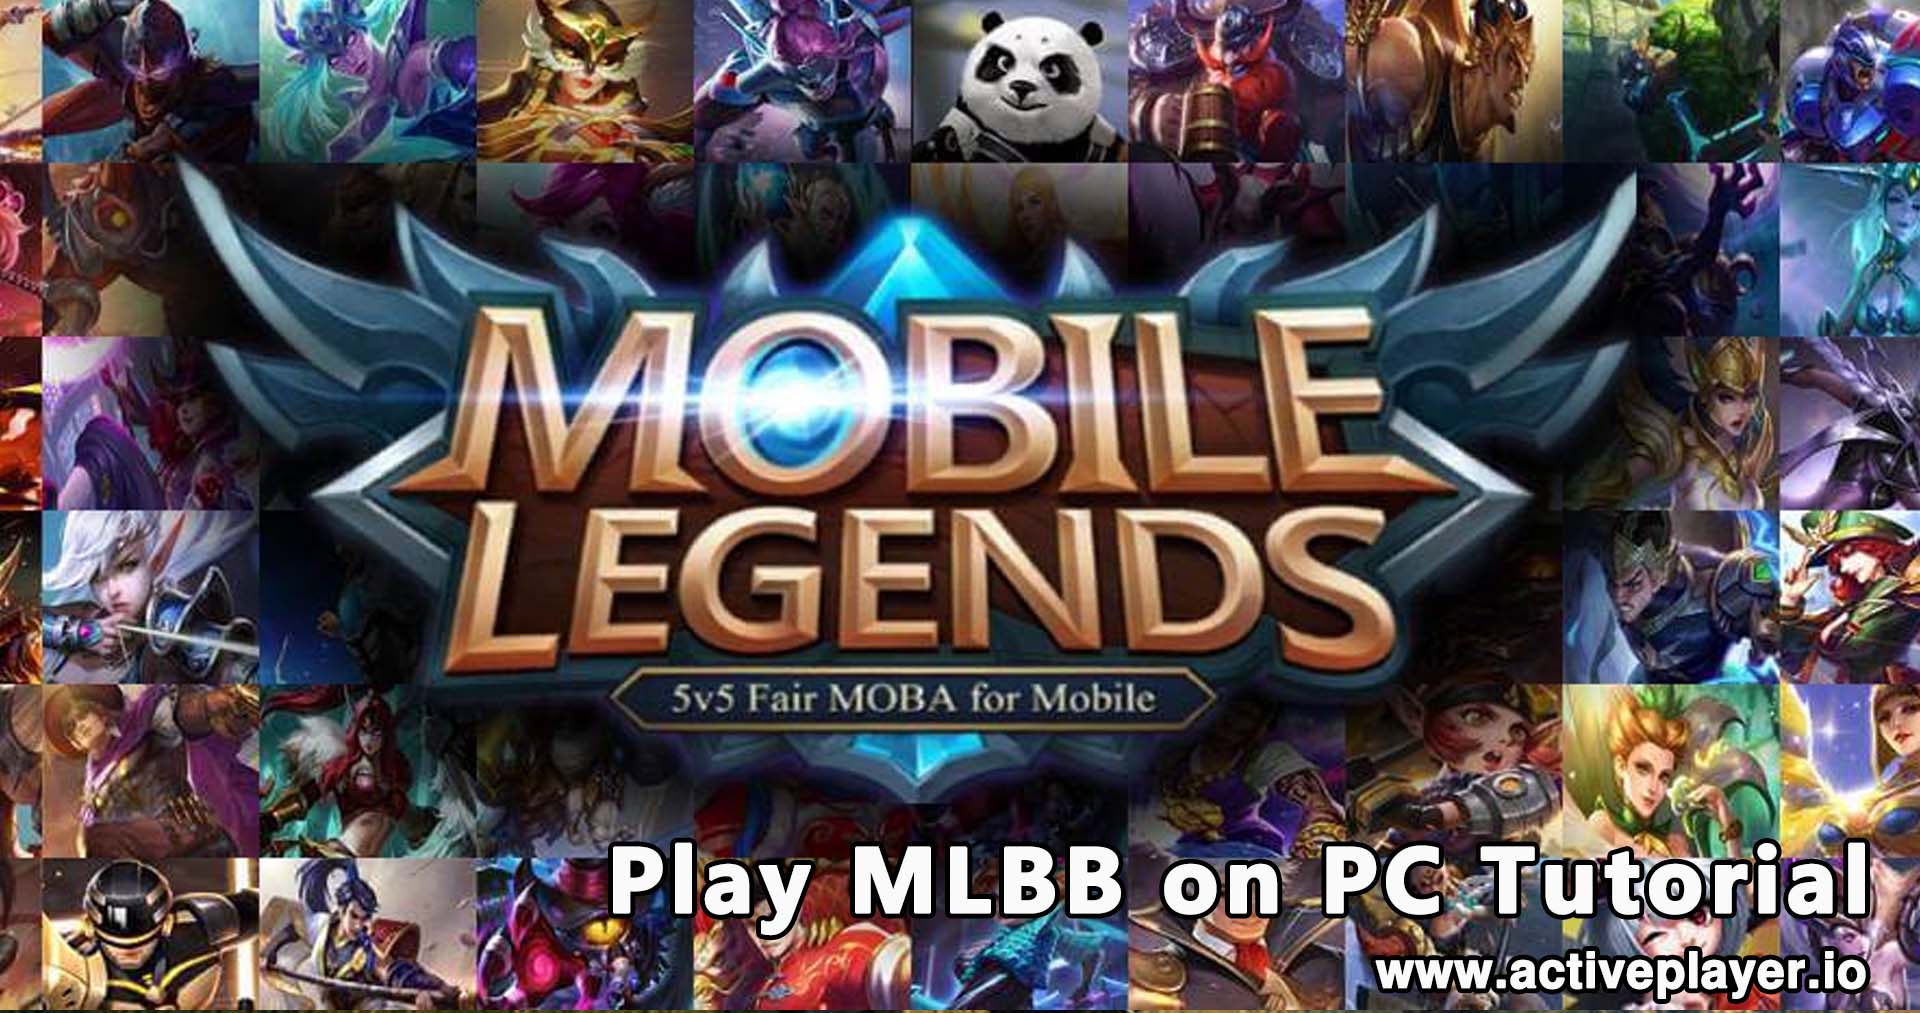 Mobile Legends: Bang Bang - All You Need to Know About the 2.0